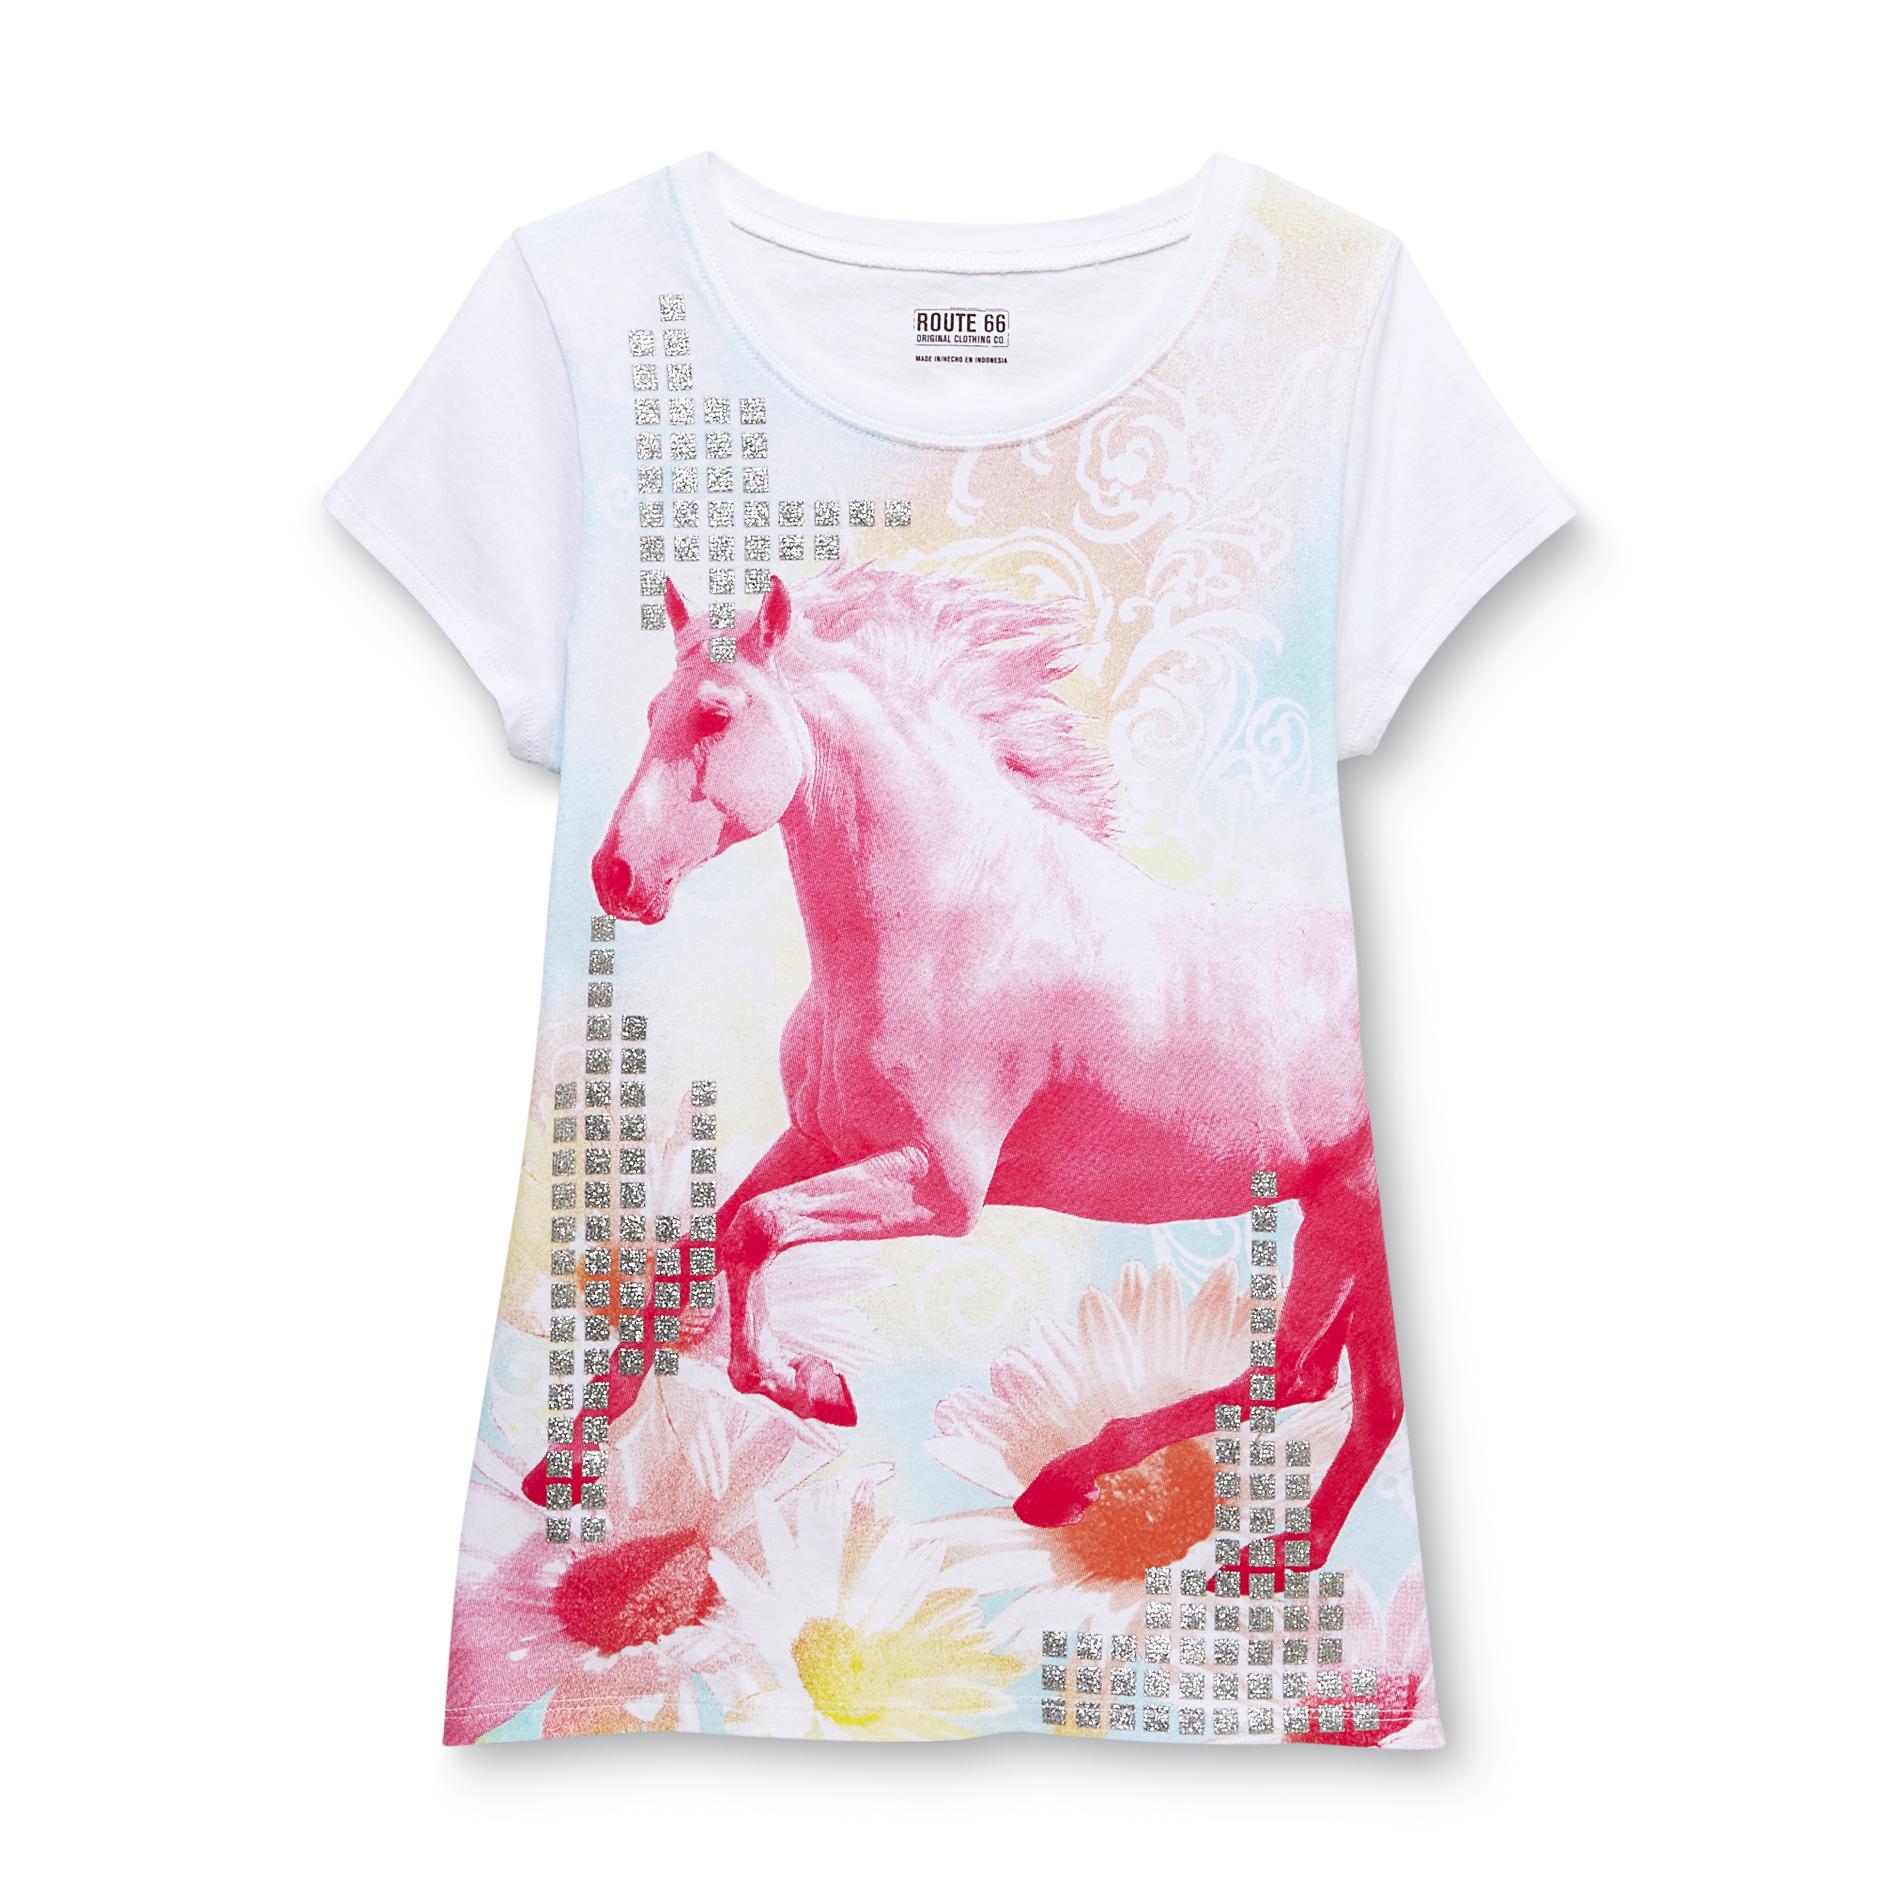 Route 66 Girl's Graphic T-Shirt - Sparkle Horse